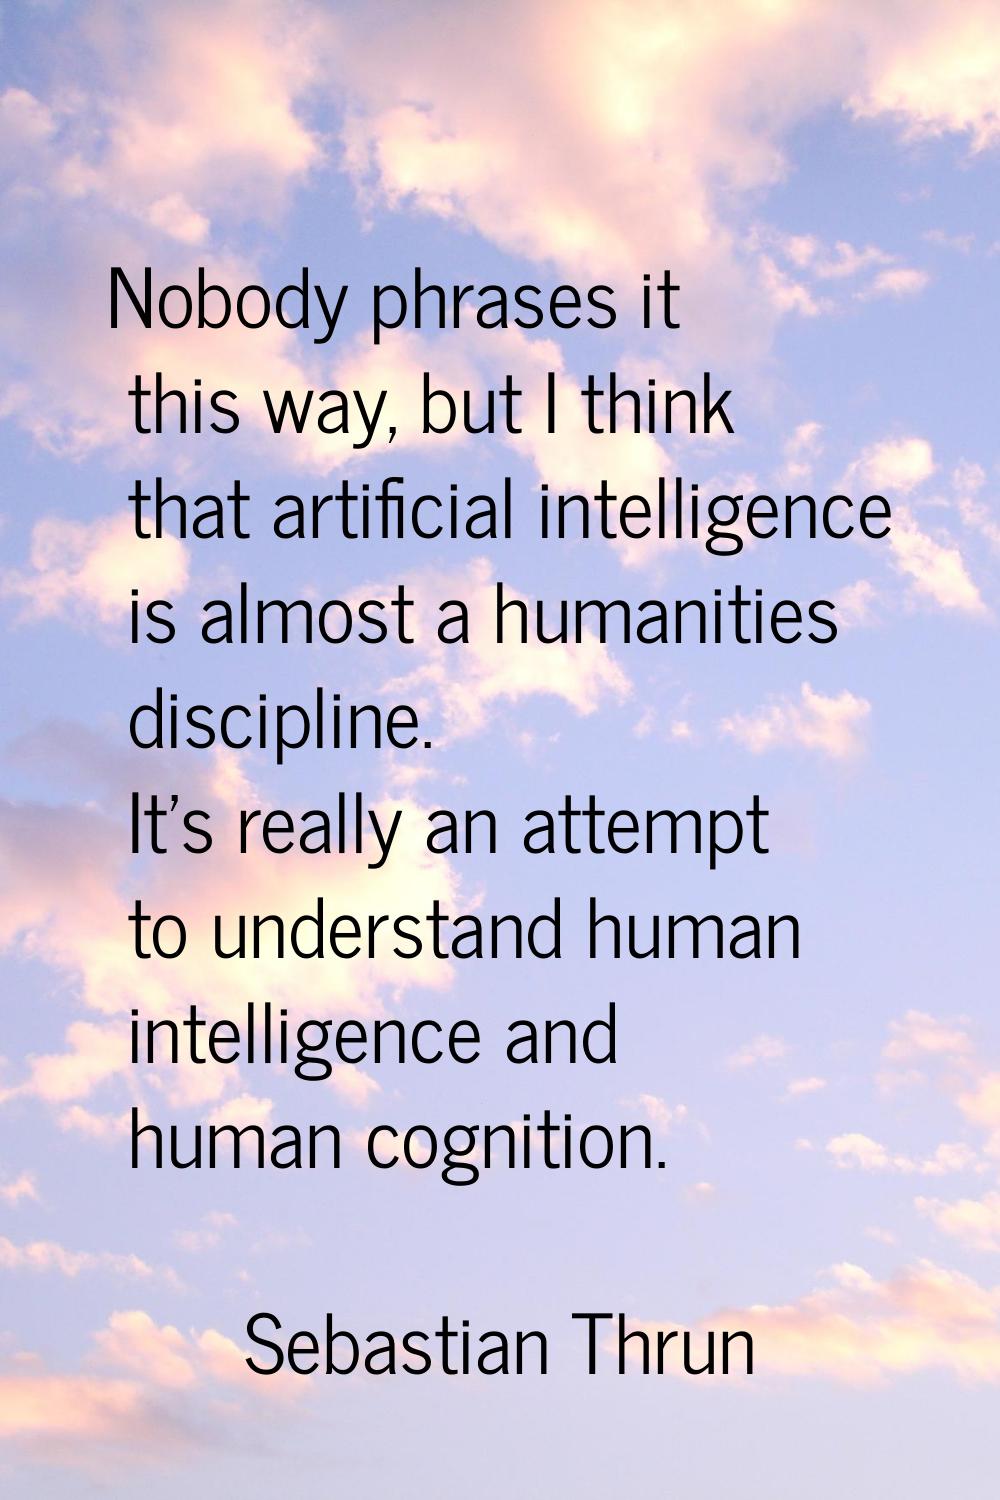 Nobody phrases it this way, but I think that artificial intelligence is almost a humanities discipl